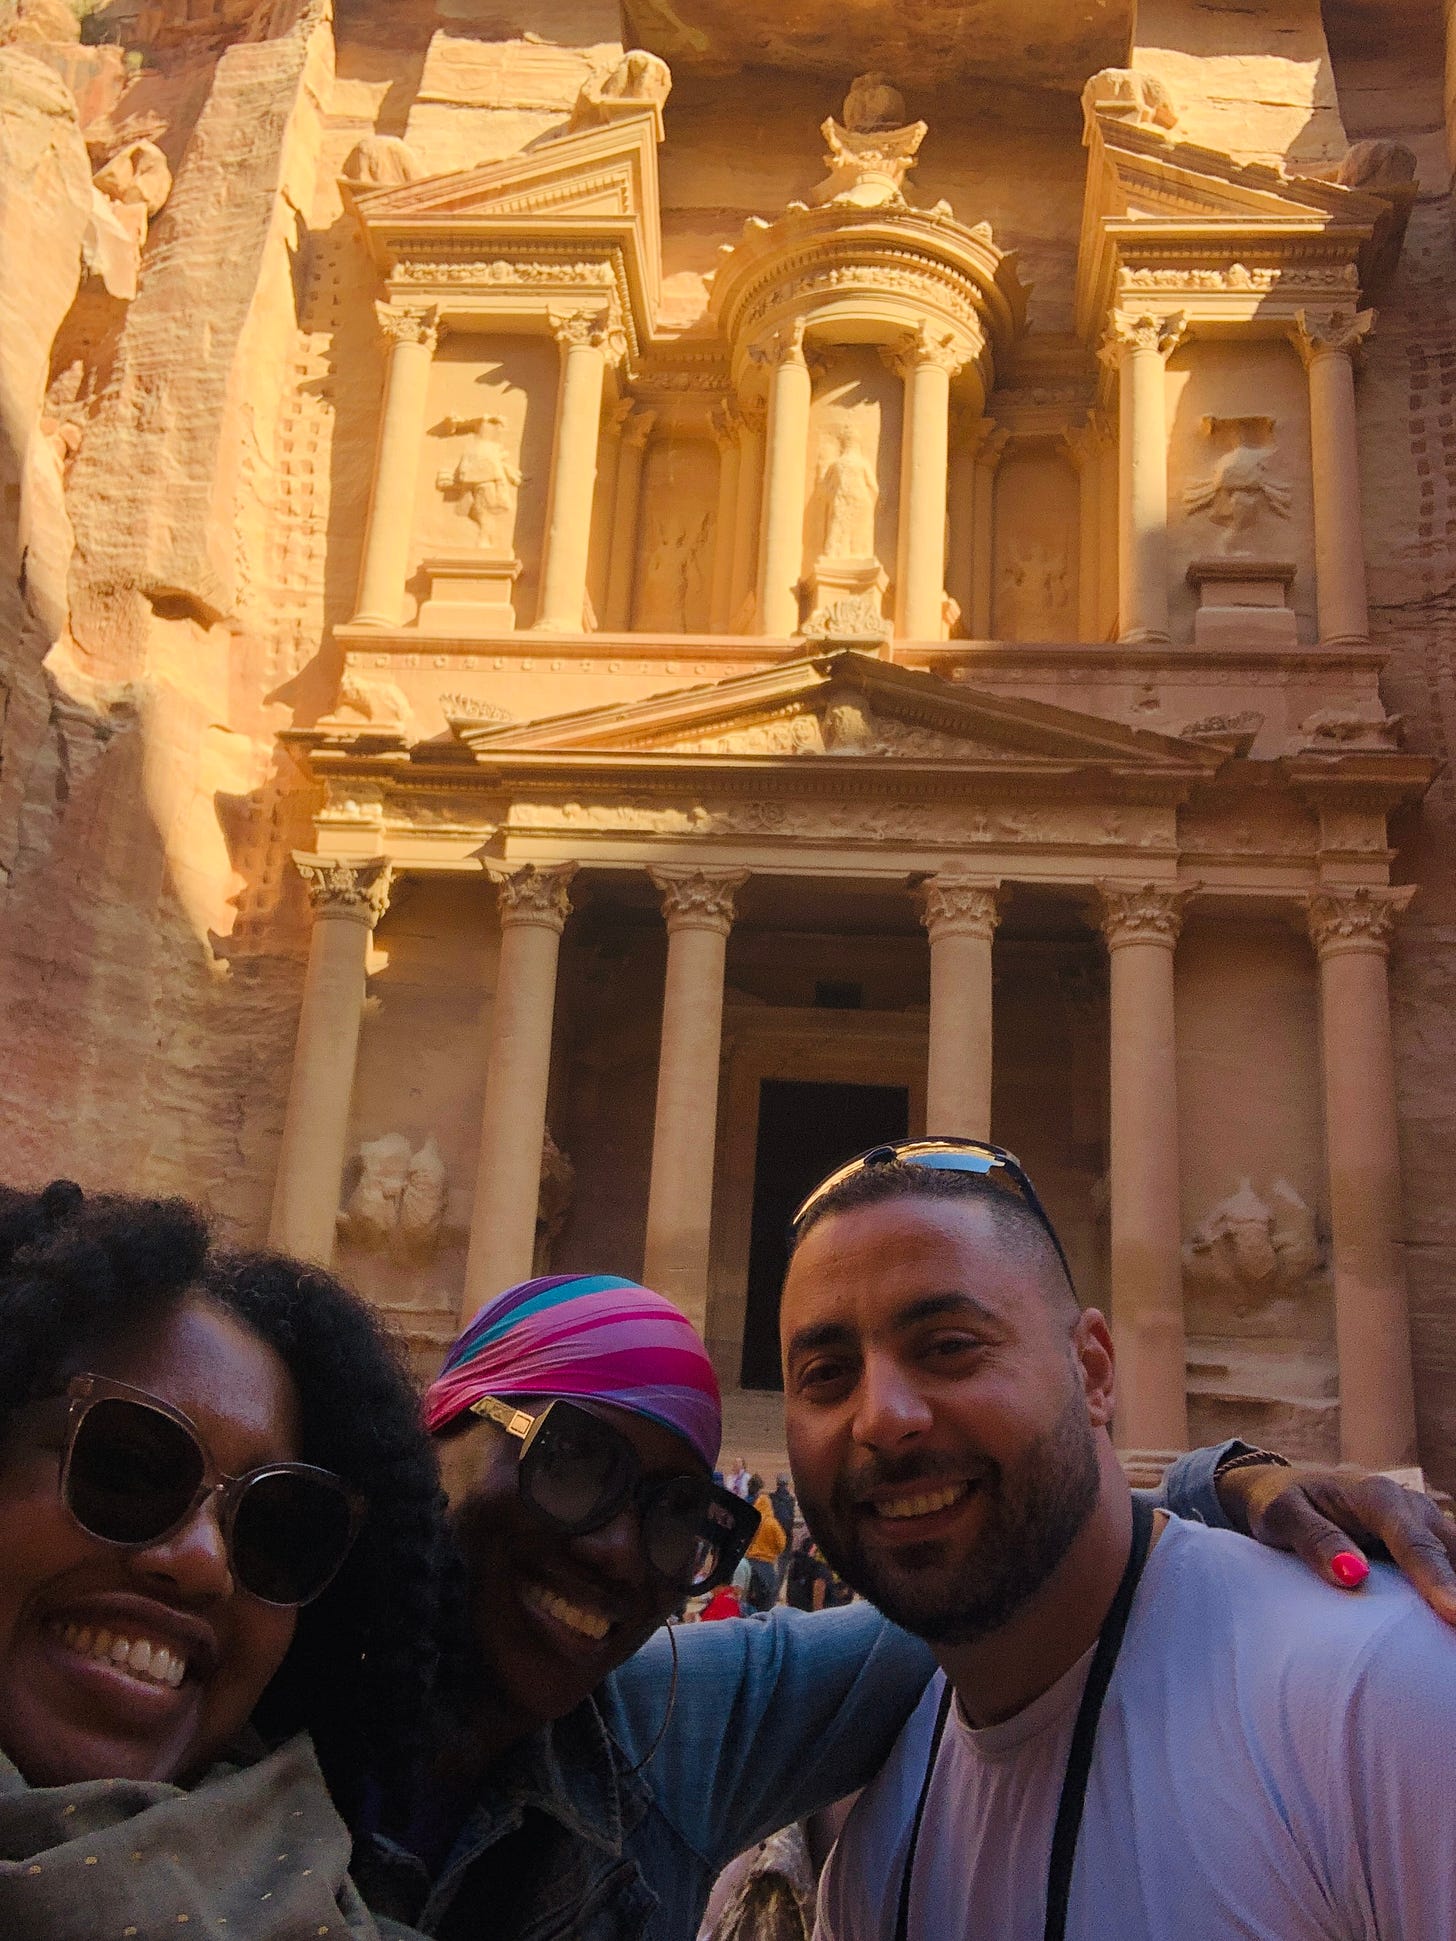 Me, my cousin, and our guide, Abed, in front of the Treasury in Petra